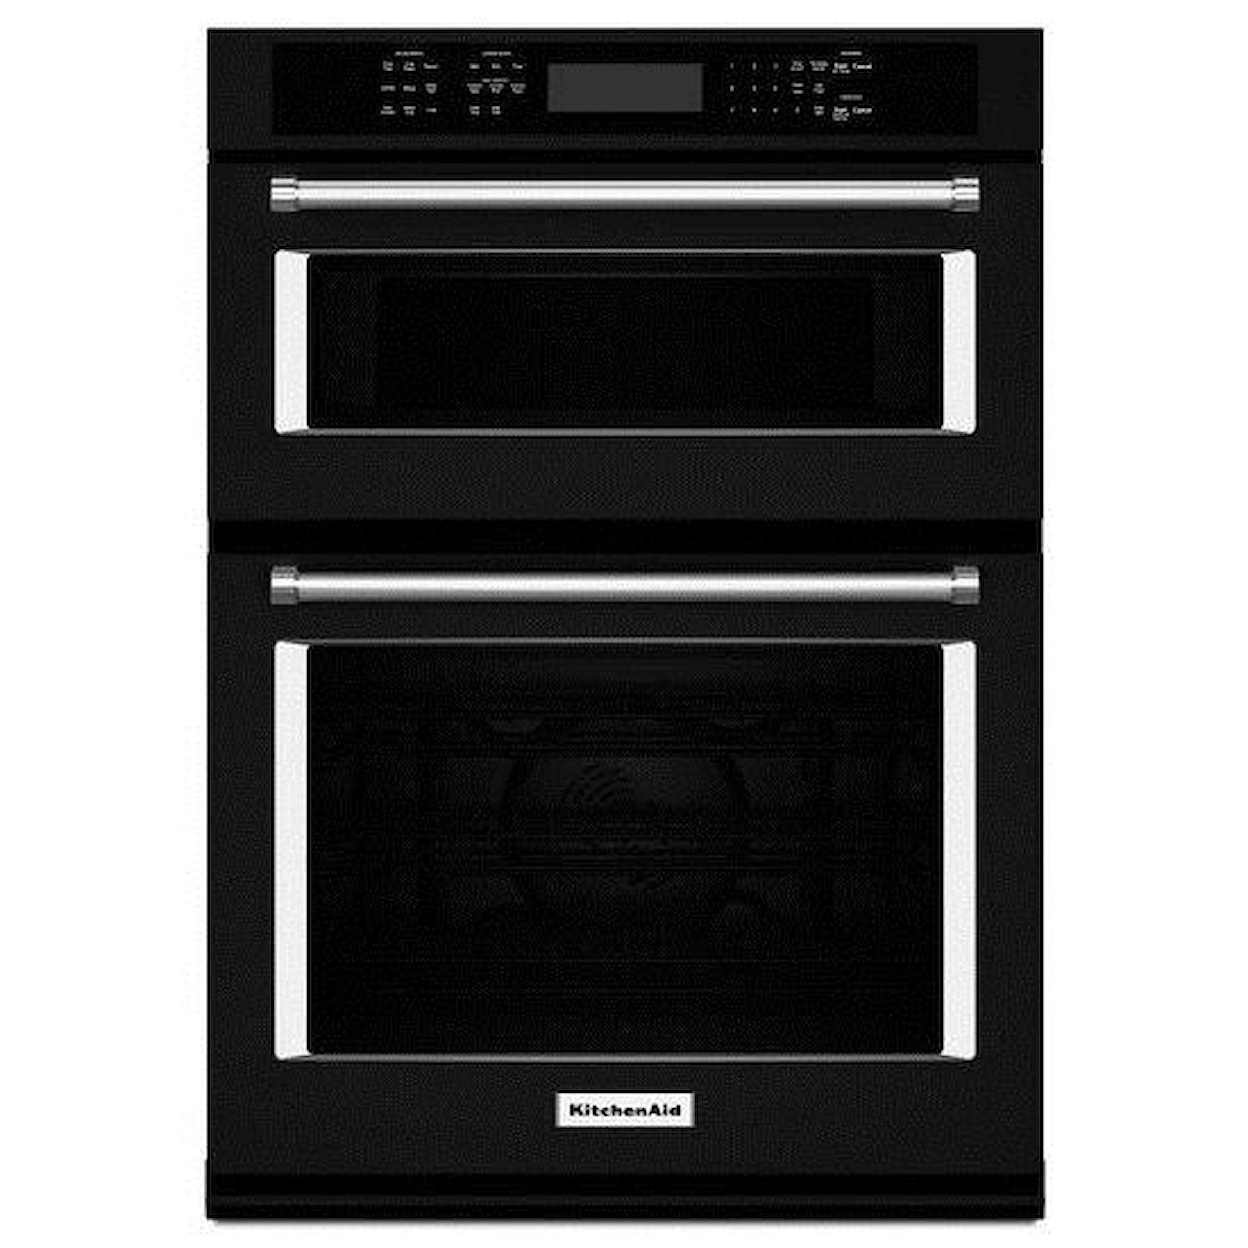 KitchenAid Combination Oven with Microwave 27" Combination Wall Oven